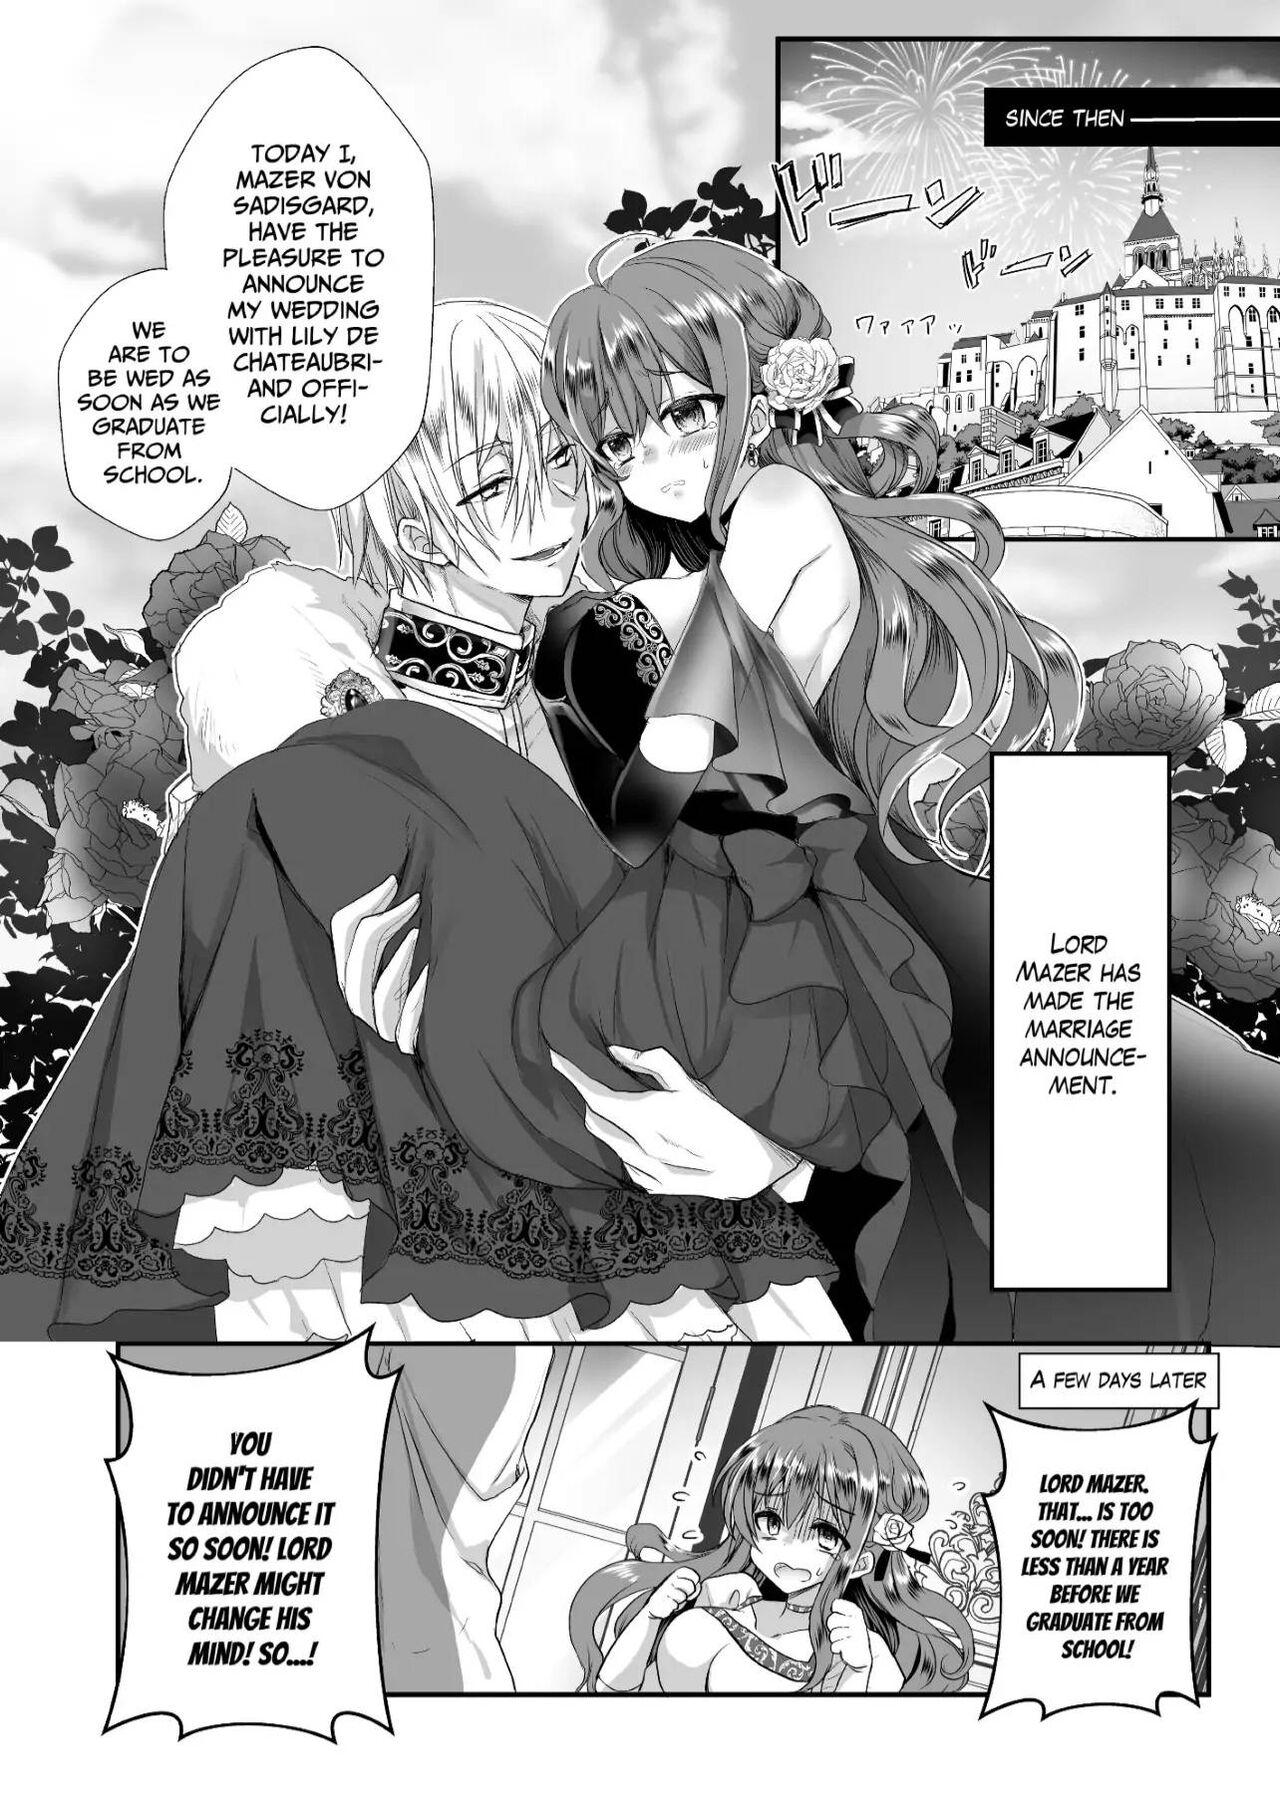 Dando [Whisker Pad (Mofuo)] JK's Tragic Isekai Reincarnation as the Villainess ~But My Precious Side Character!~ 2 [English] [Digital] - Original 18 Year Old Porn - Page 4